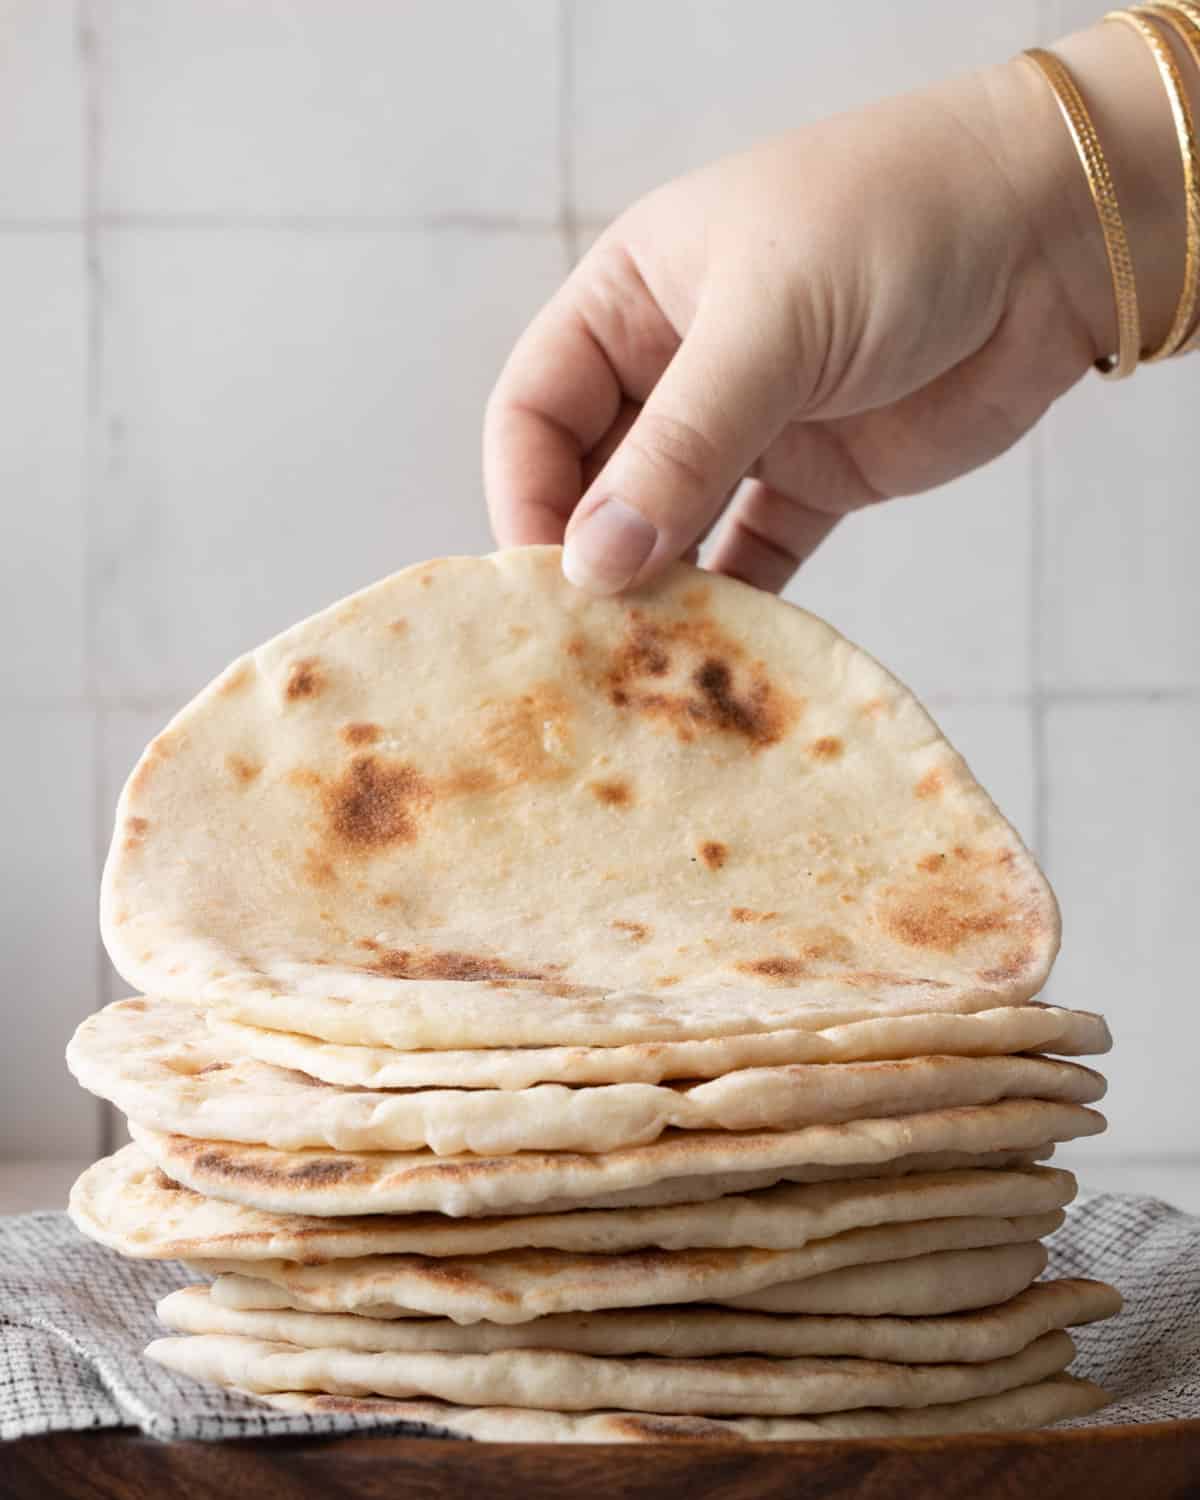 hand picking up a pita bread from a stack of pita on a plate.